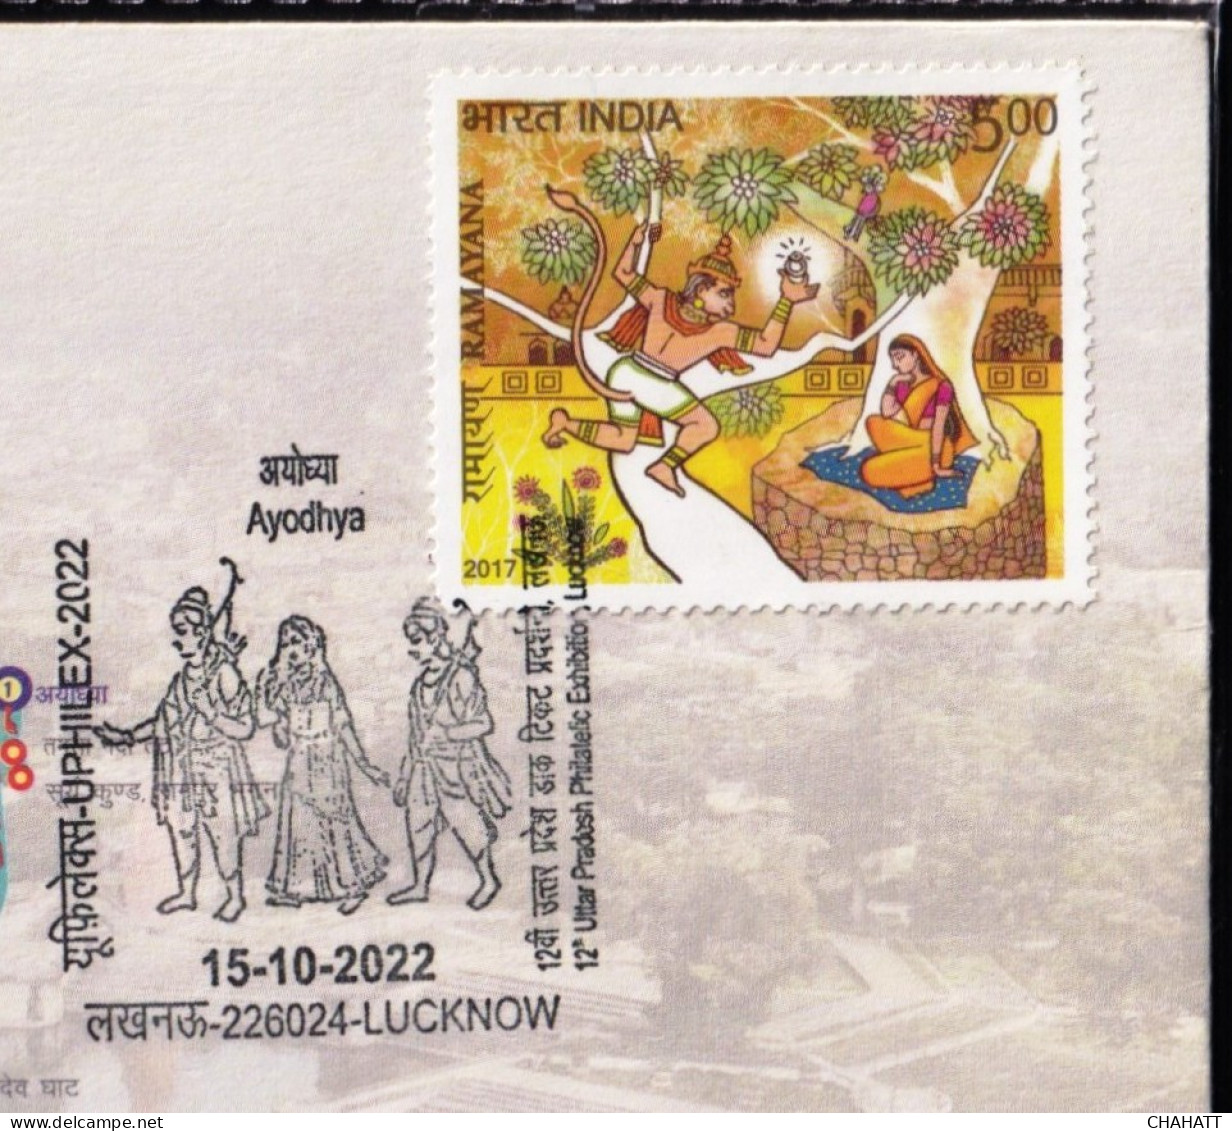 HINDUISM - RAMAYAN-  ARCHERY, AYODHYA - PICTORIAL CANCELLATION - SPECIAL COVER - INDIA -2022- BX4-23 - Induismo